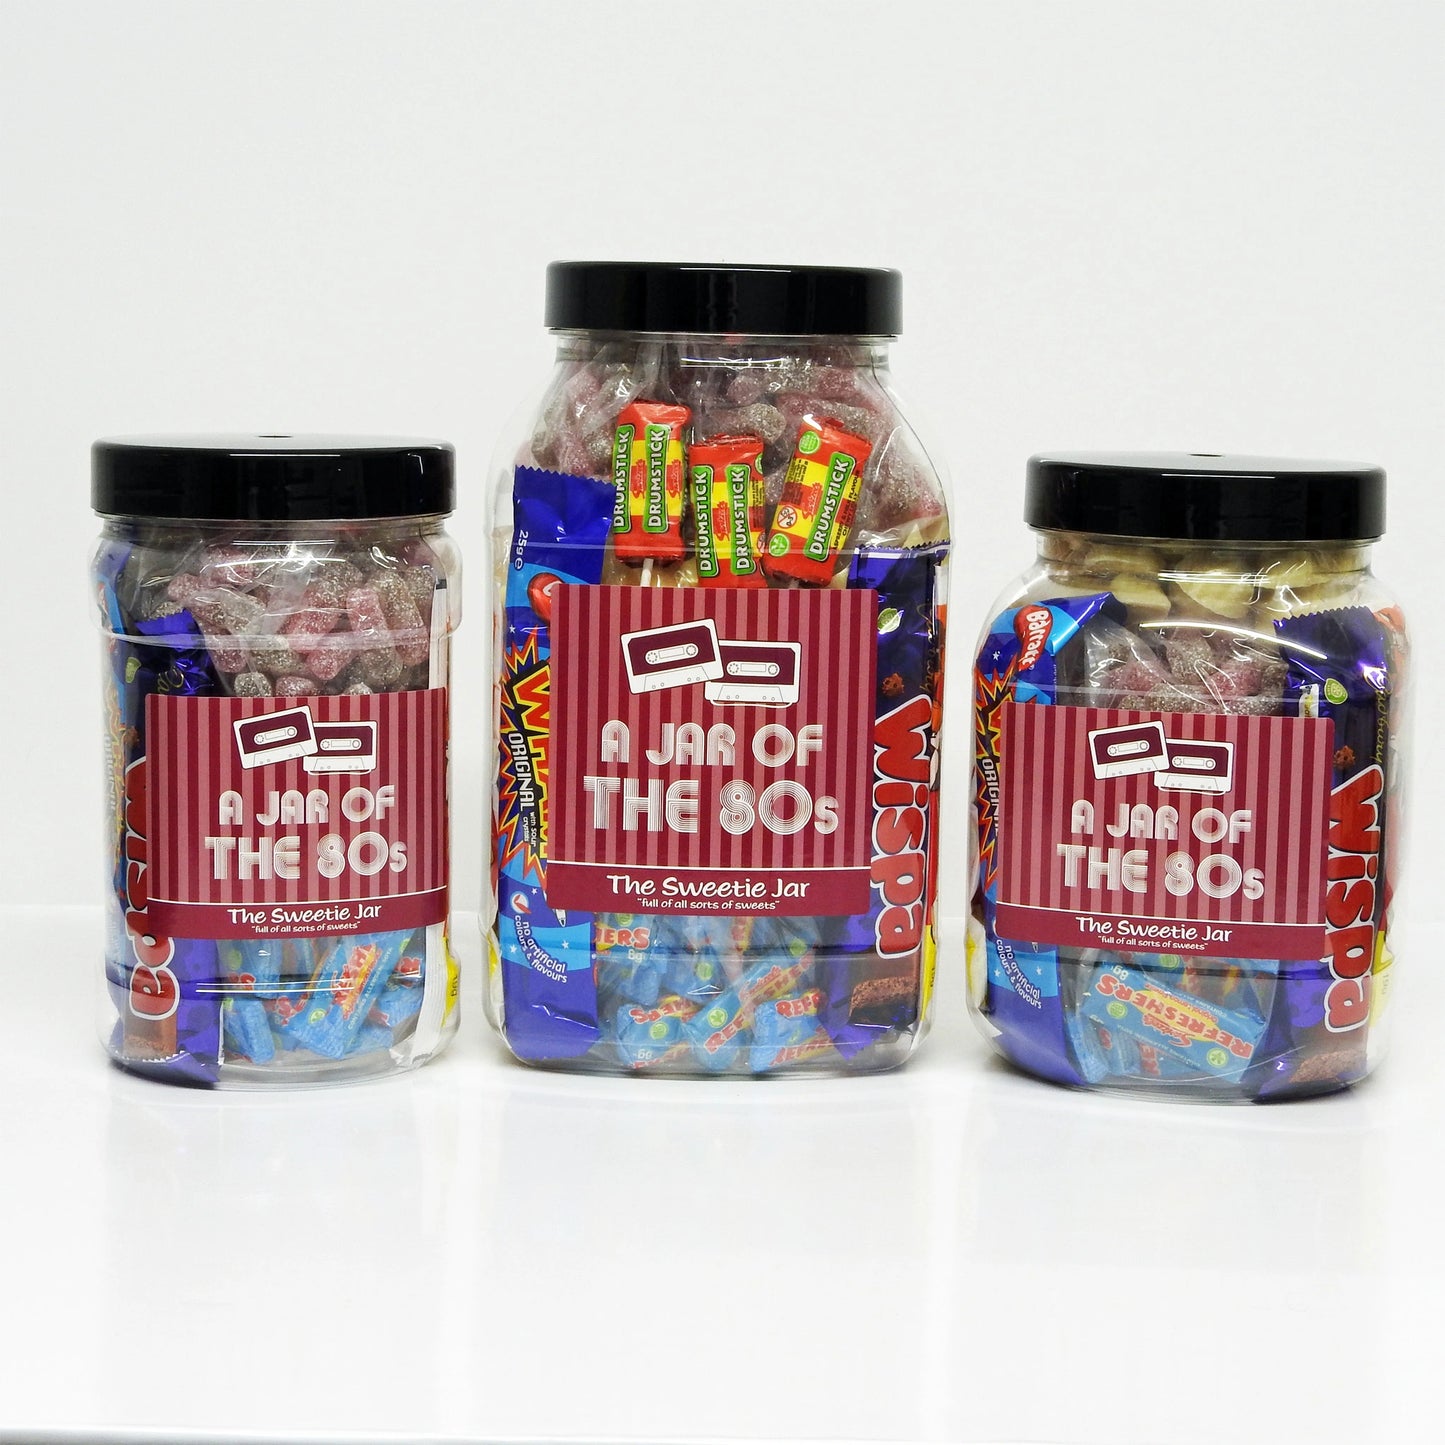 A Jar of the 80s - Retro Sweets Gift Jars at The Sweetie Jar